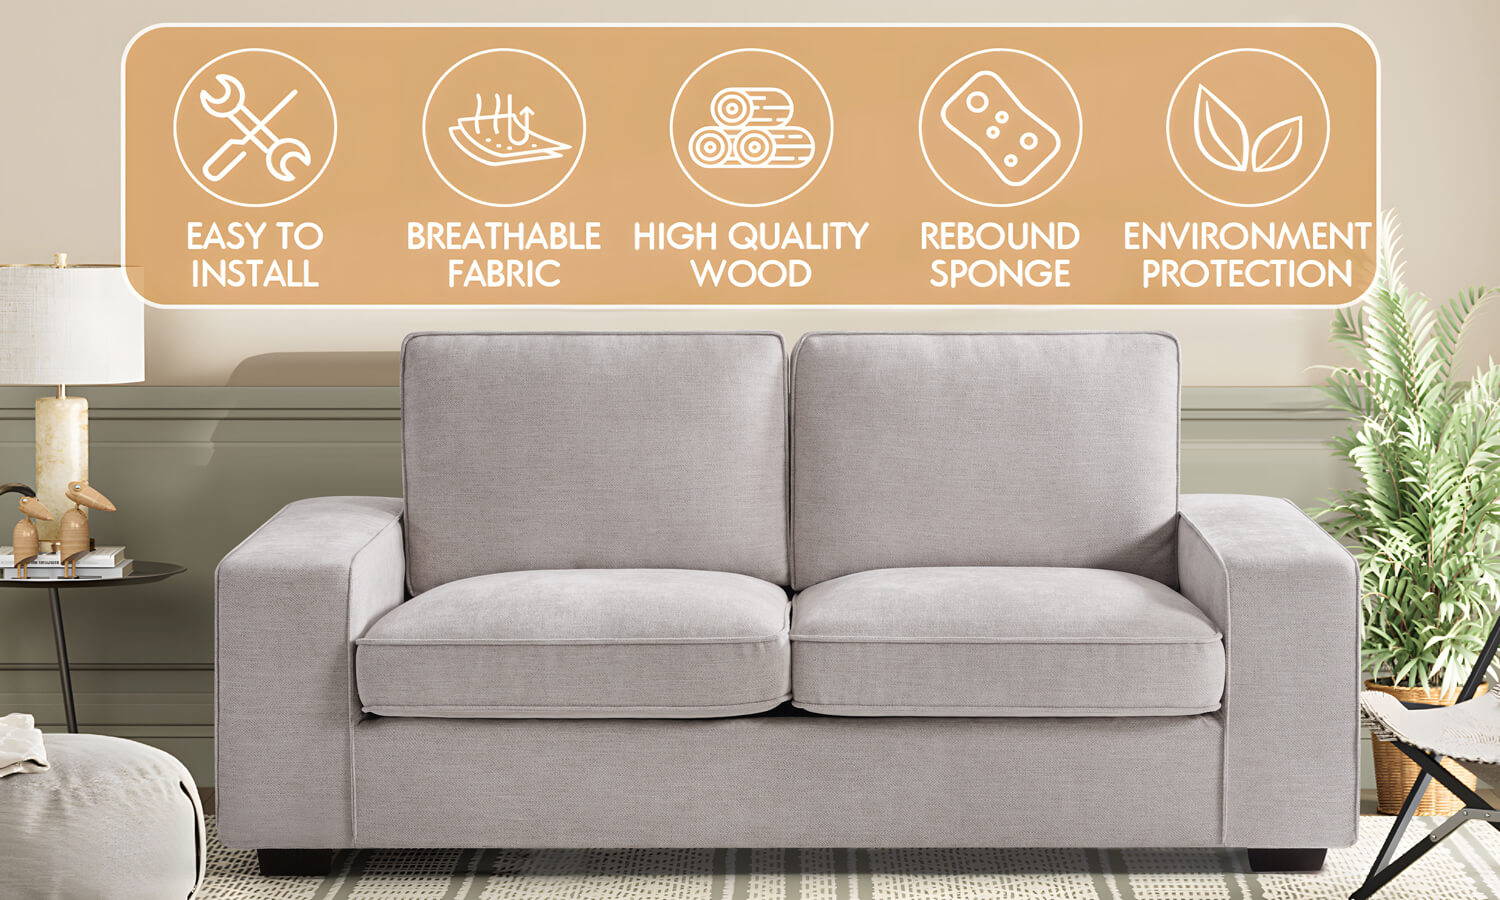 ASJMREYE Fabric Sofa With Solid Wood Frame, Removable Back Cushion And Easy, Tool-Free Assembly